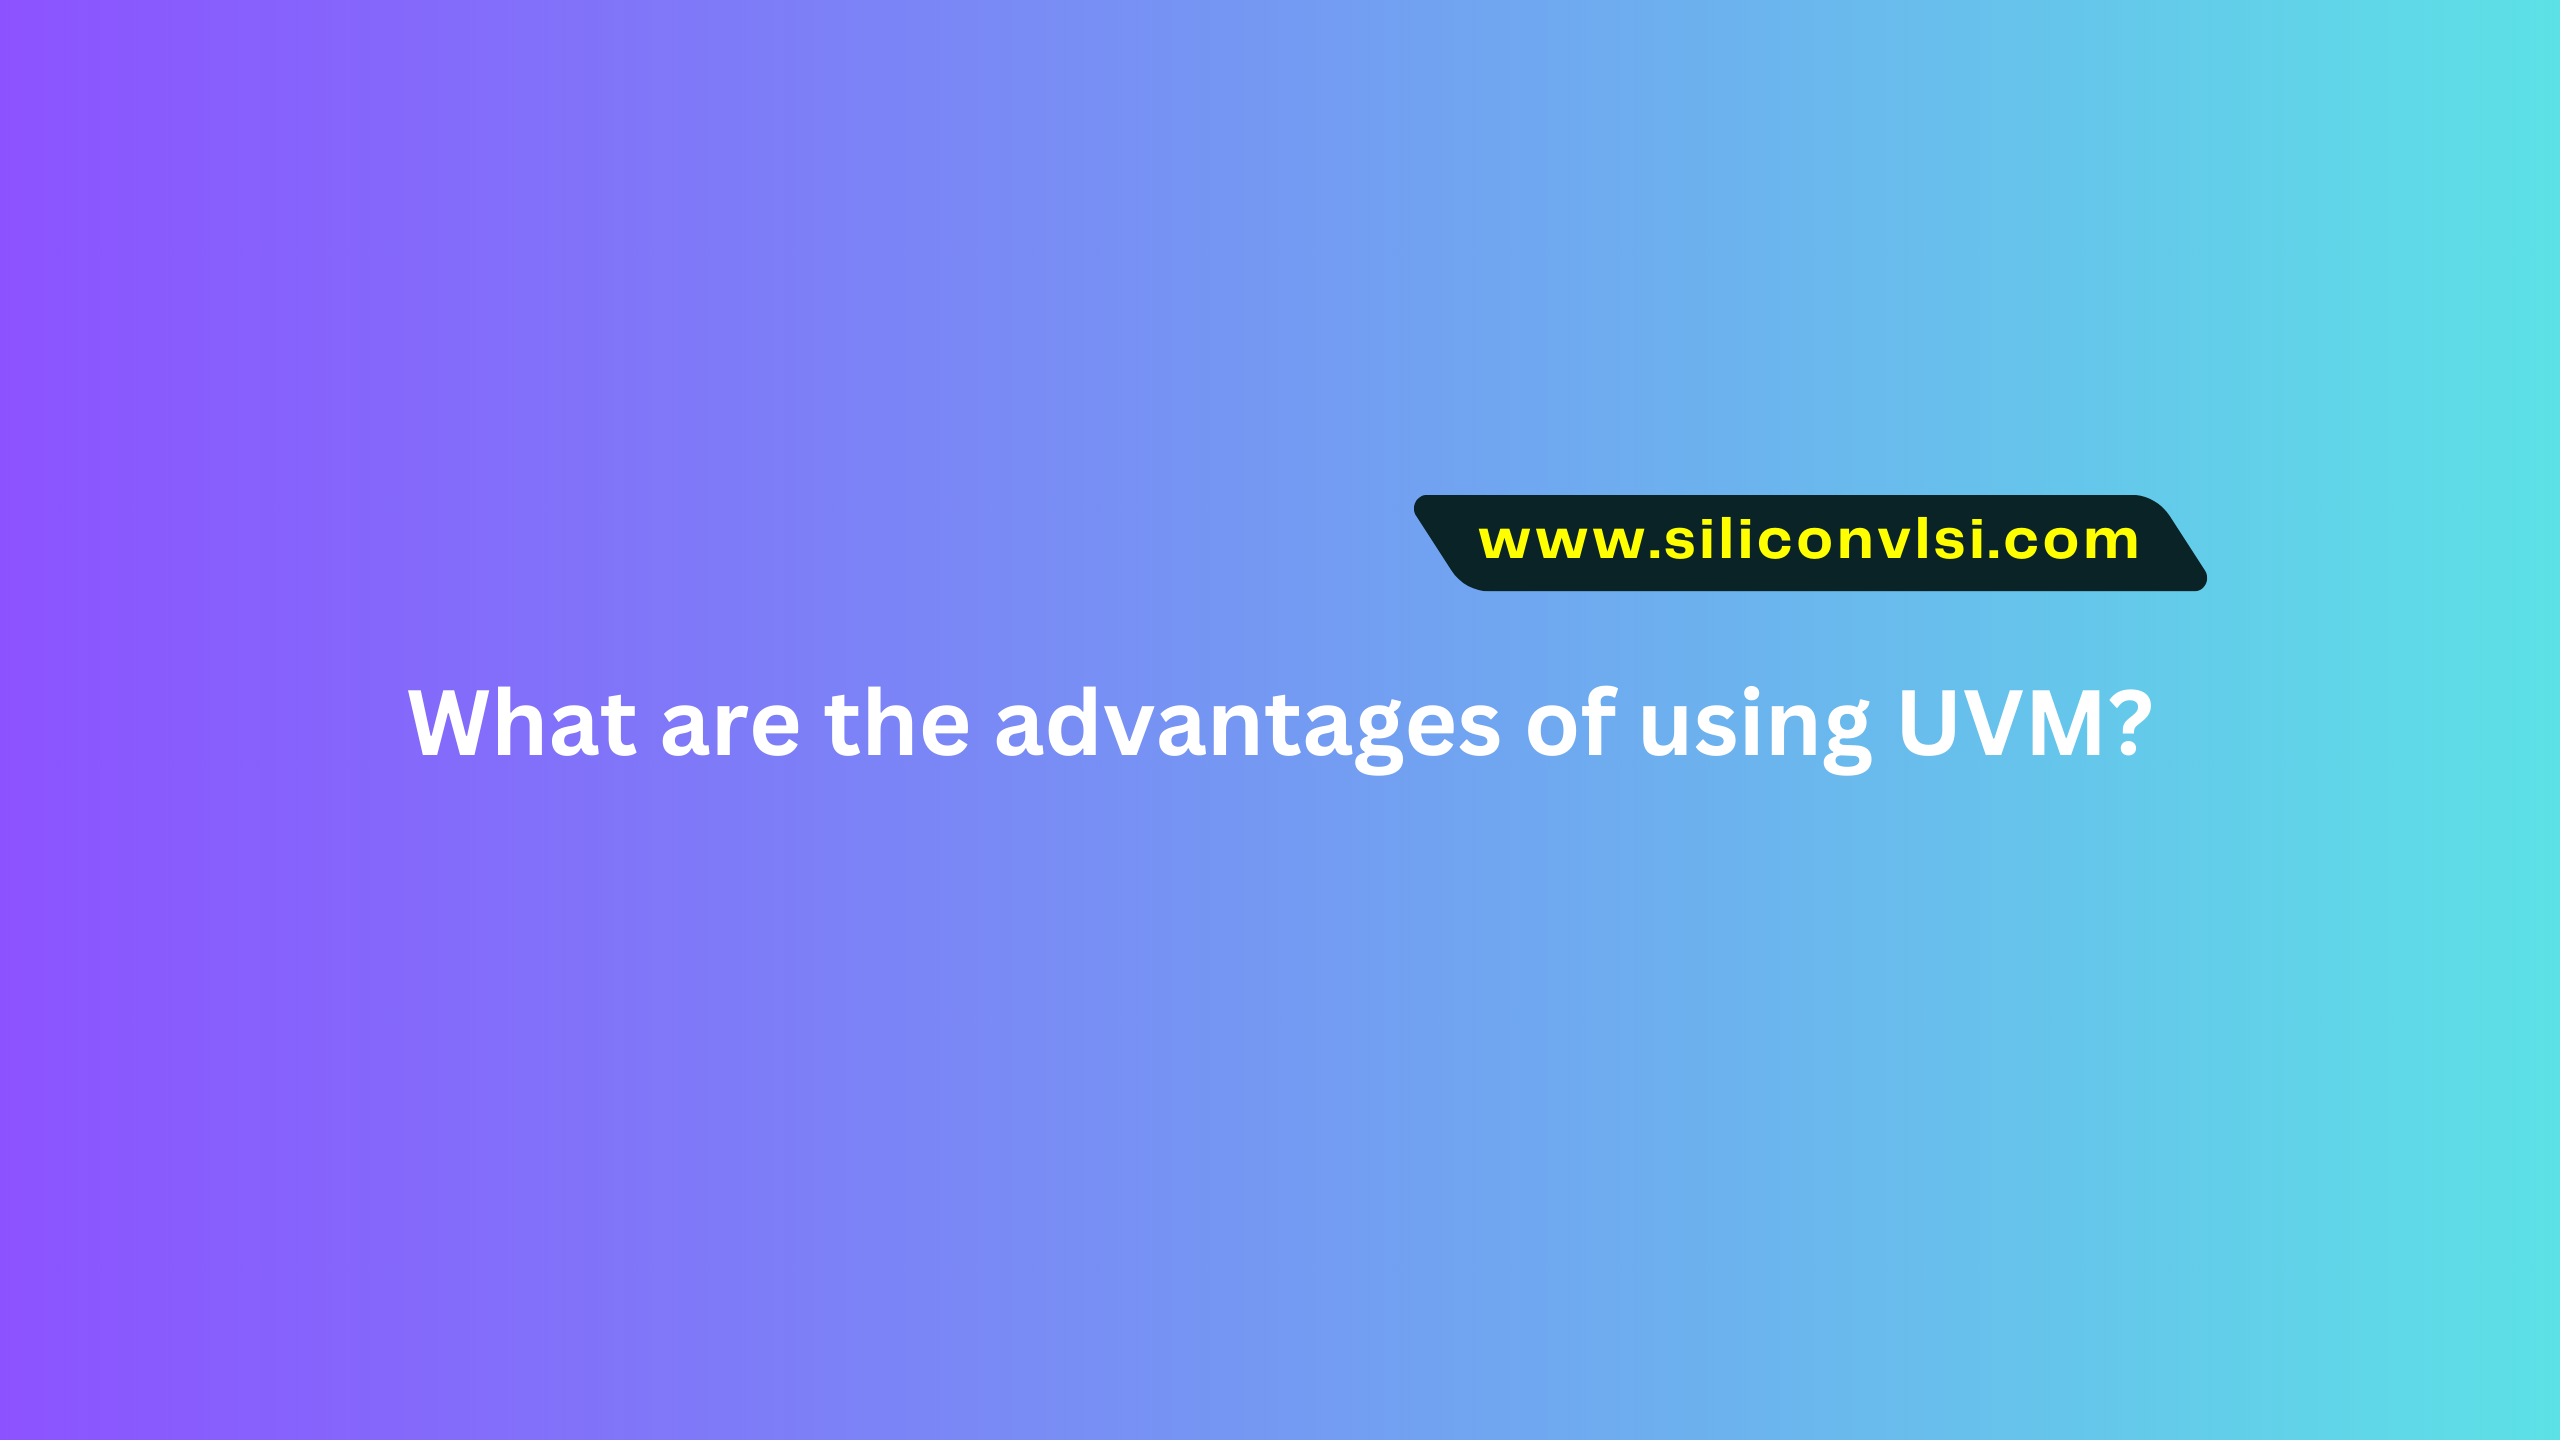 What are the advantages of using UVM